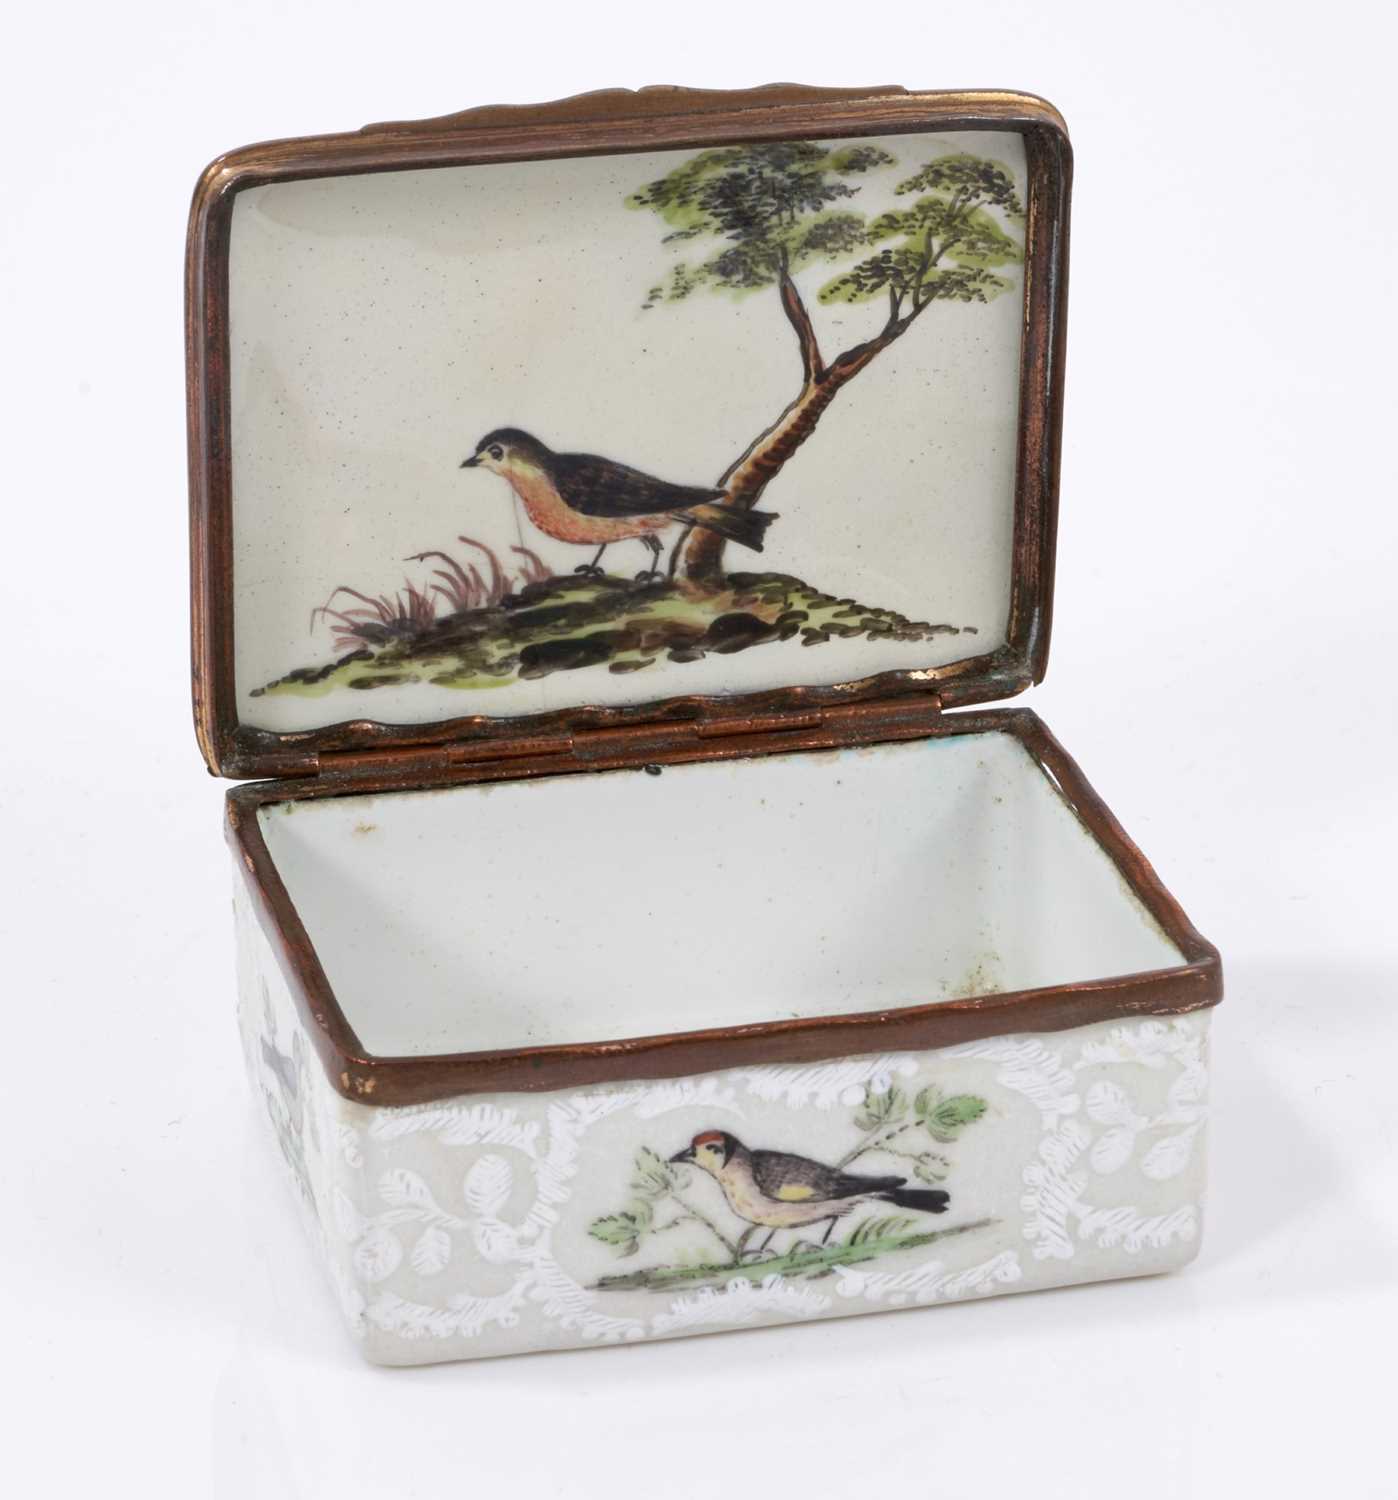 An 18th century enamel box, painted with birds - Image 4 of 4